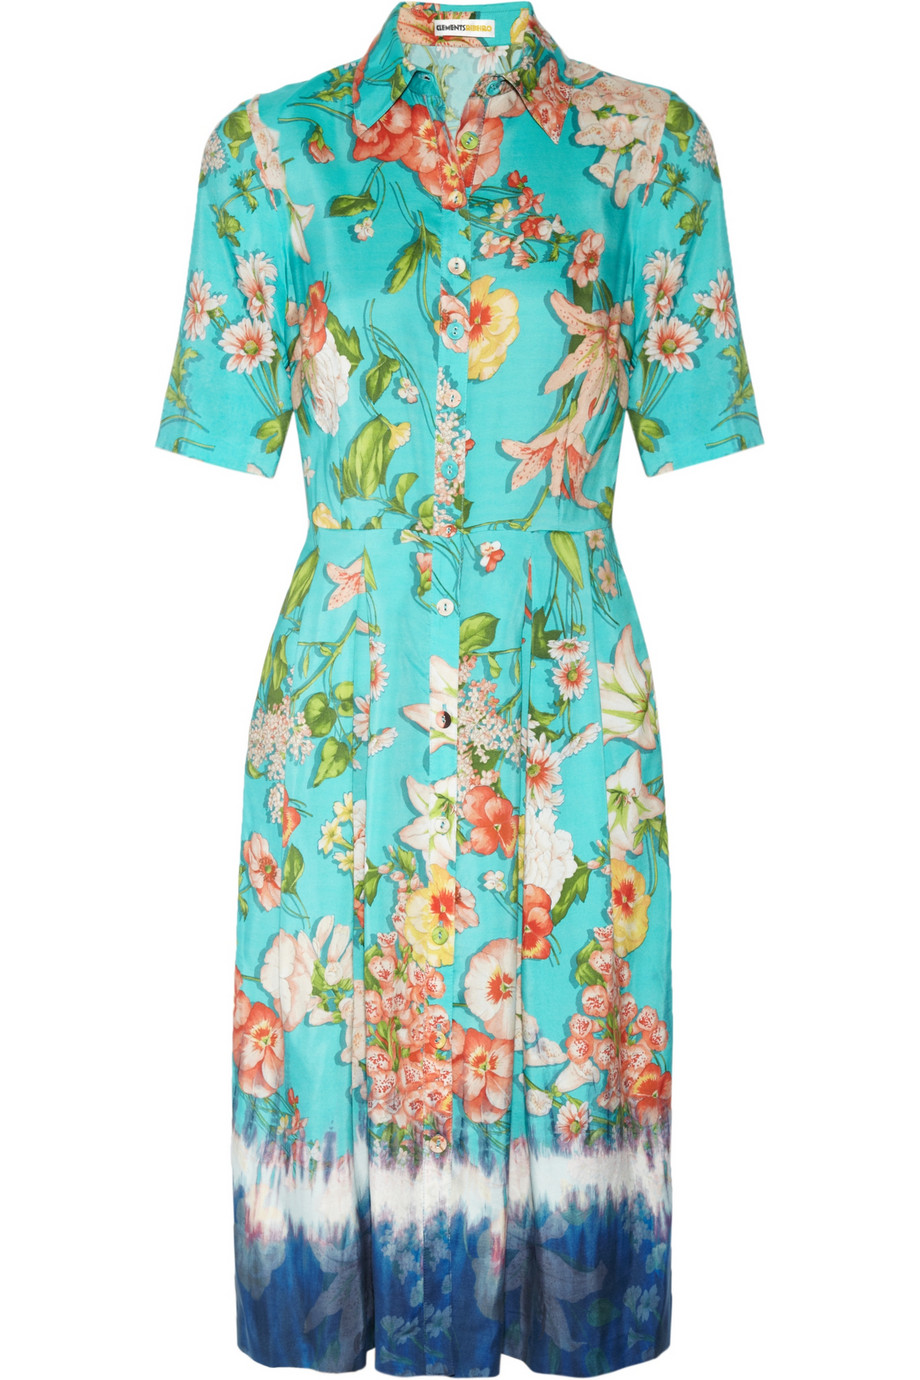 Clements Ribeiro Foxglove Floral-Print Washed-Silk Dress in Floral | Lyst